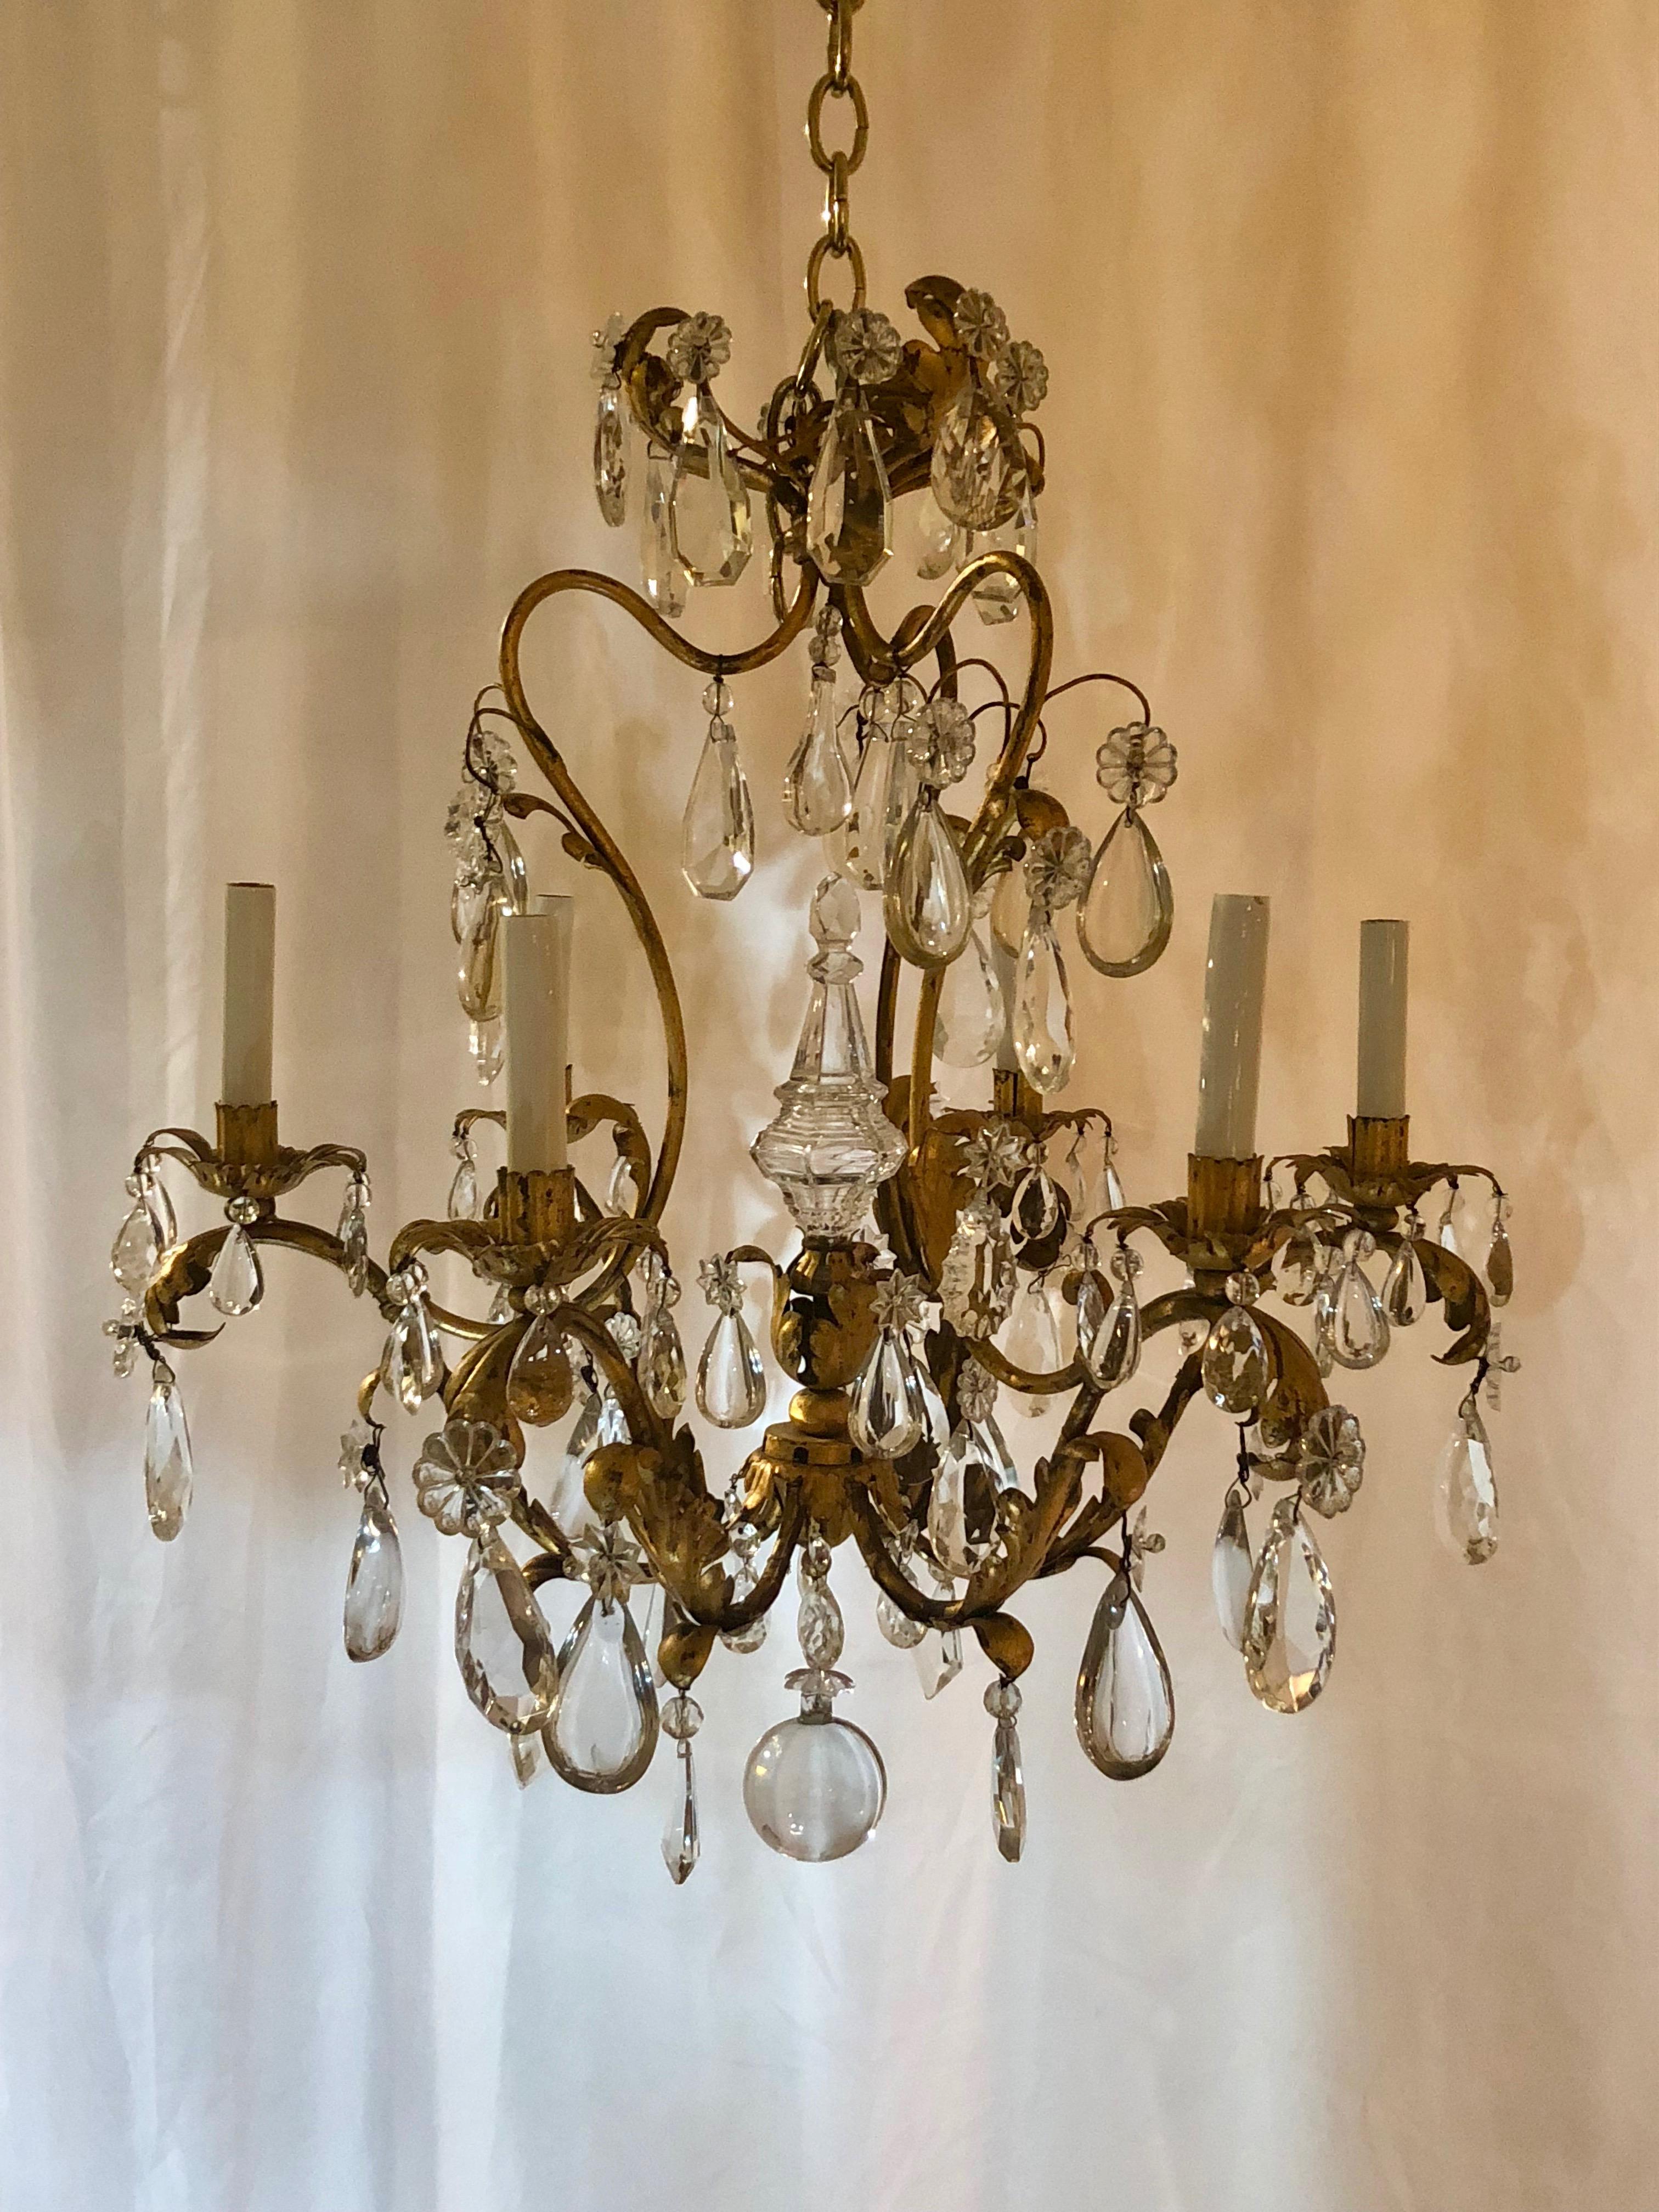 Antique French gilded tole and crystal chandelier, circa 1920-1930.